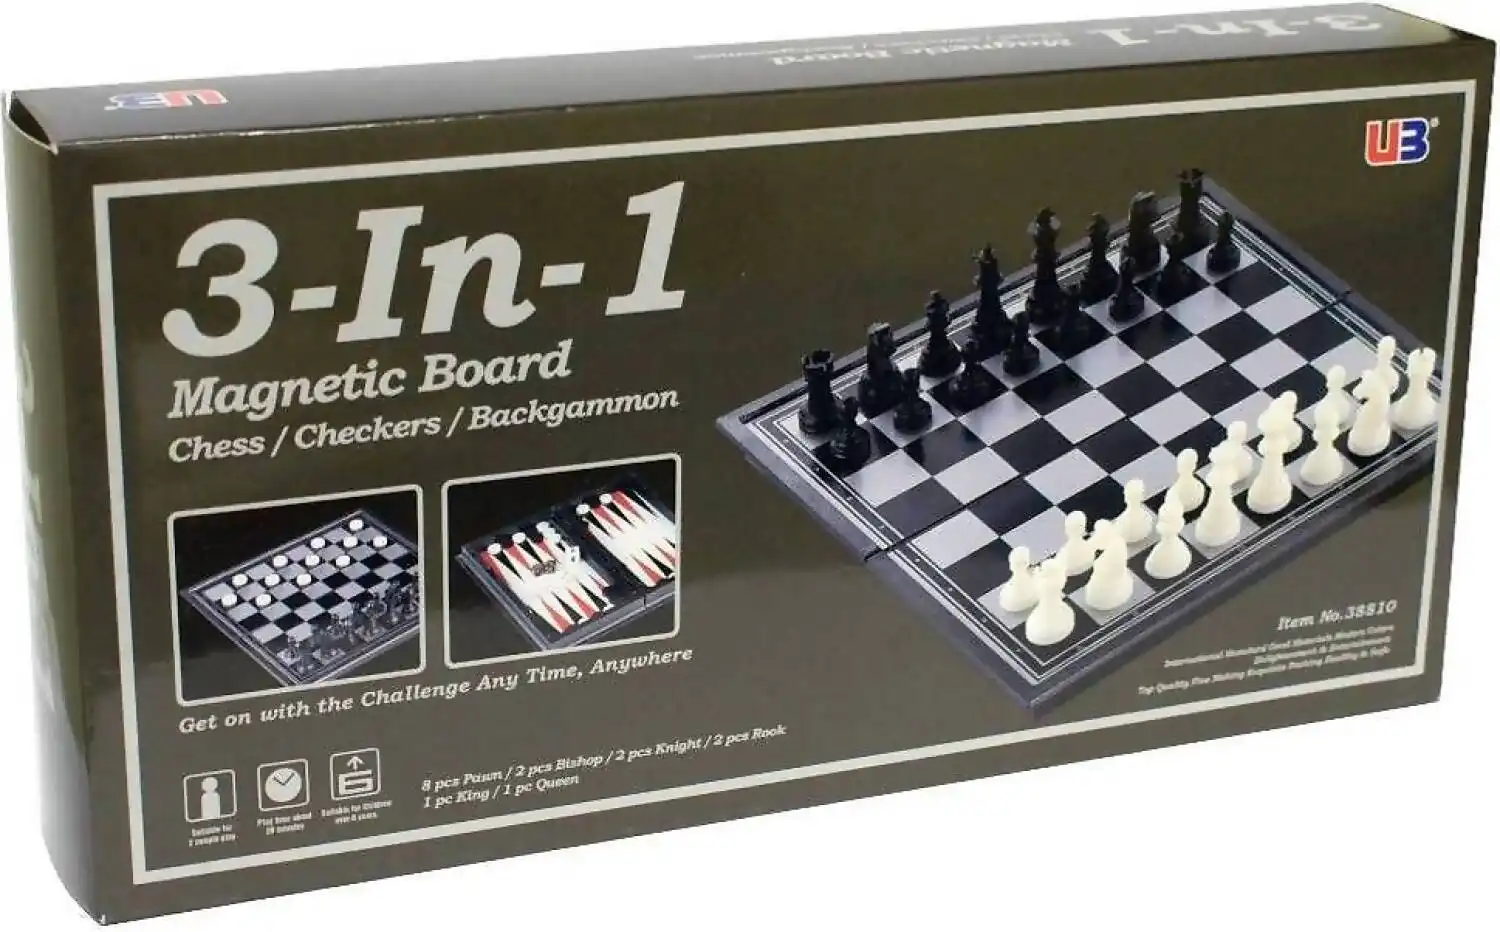 U3 - Magnetic 3-in-1 Chess Checkers Backgammon Set